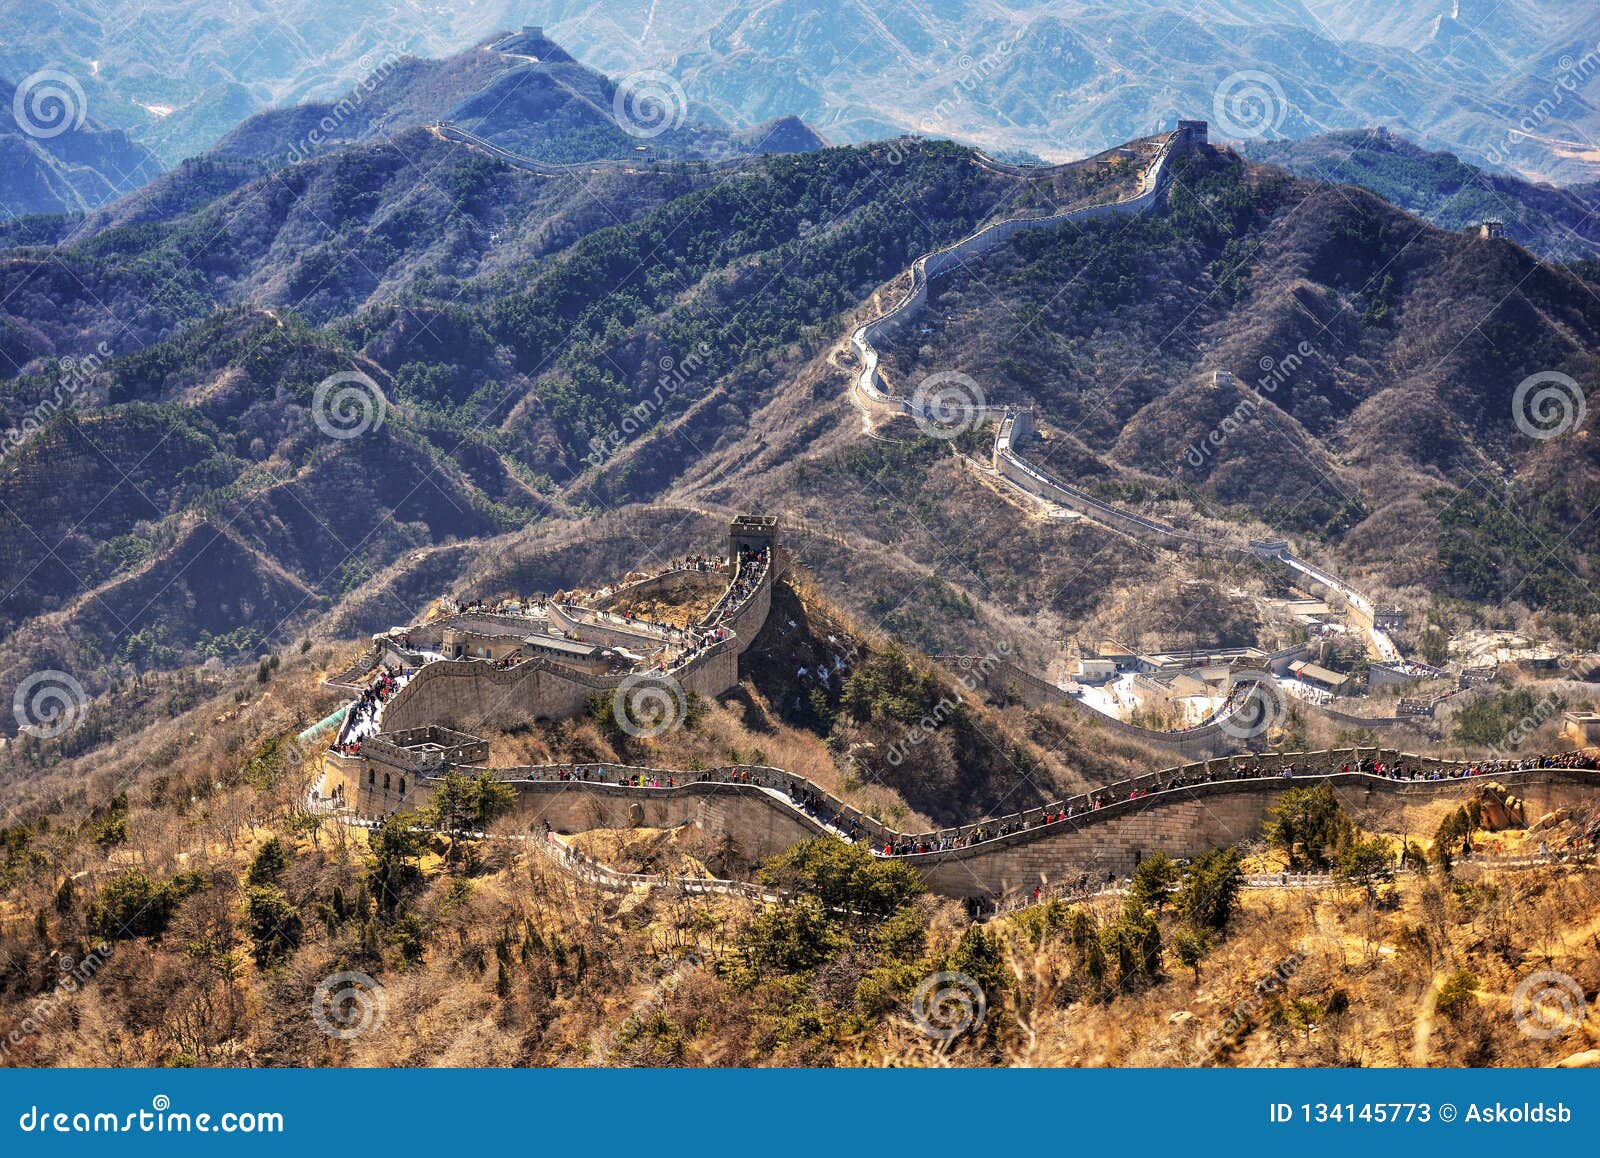 Great Chinese Wall In The Mountains Near Beijing Stock Image - Image of historic, world: 134145773